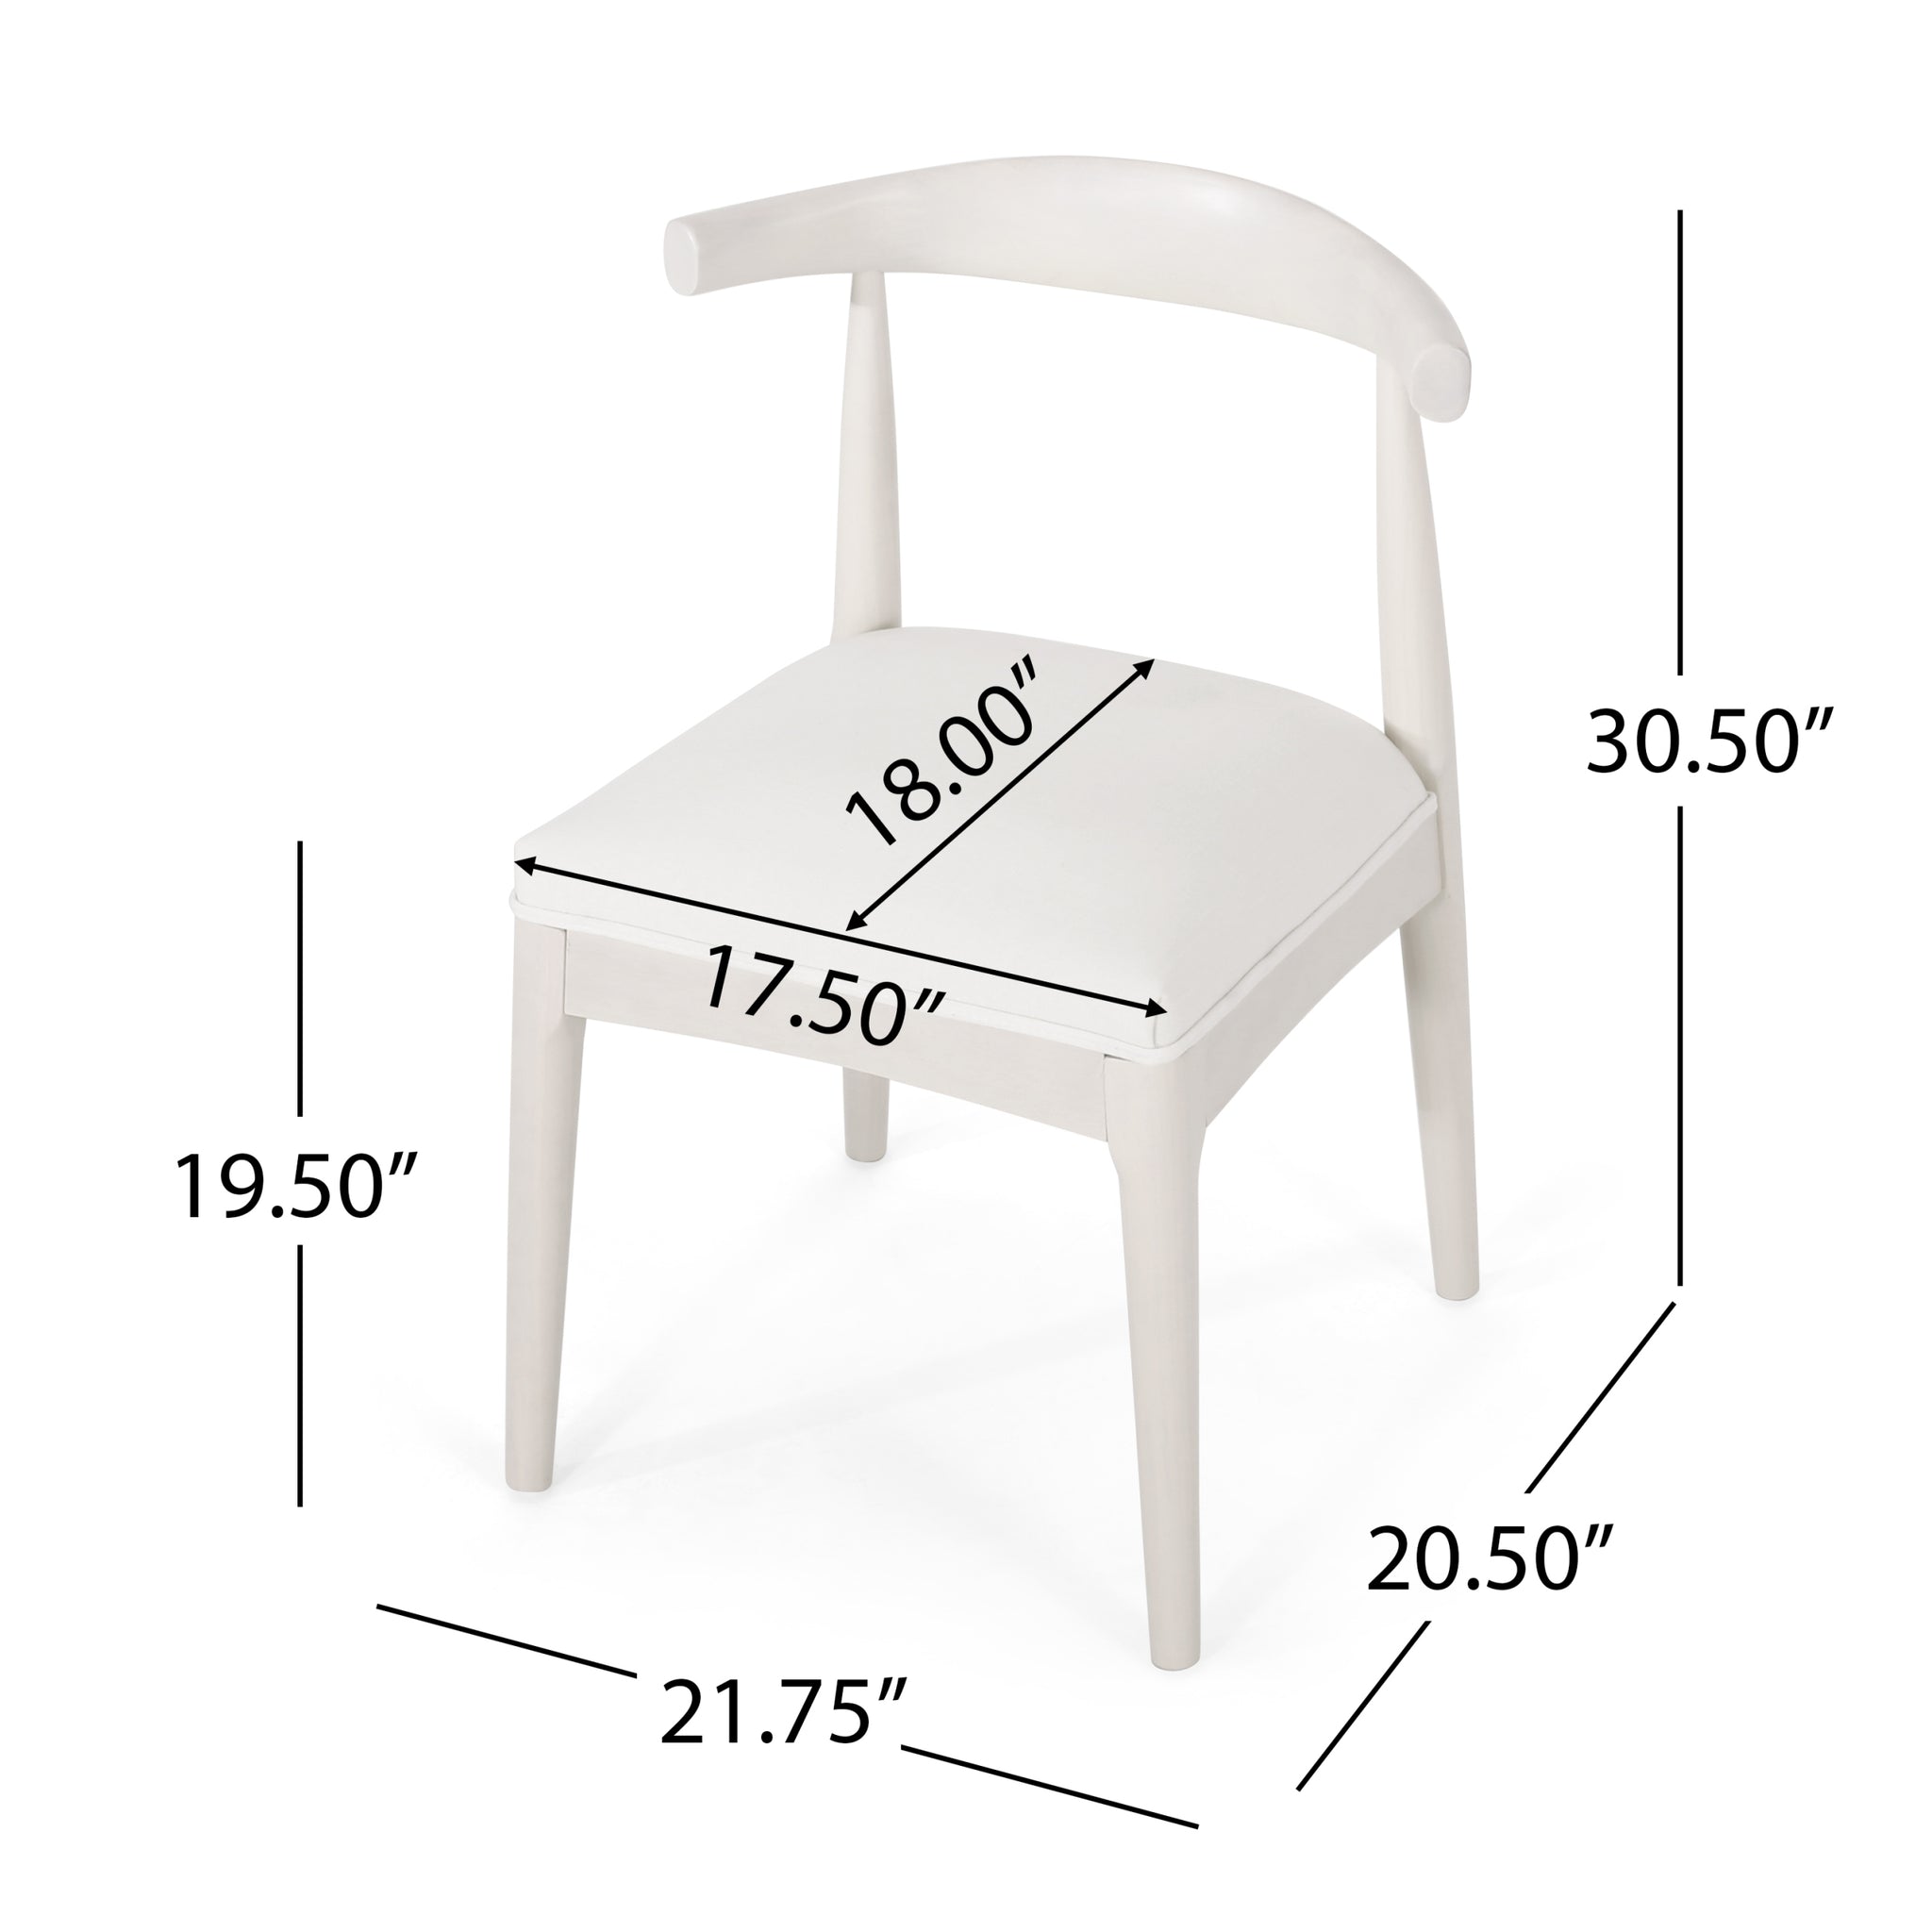 DINING CHAIR white-fabric